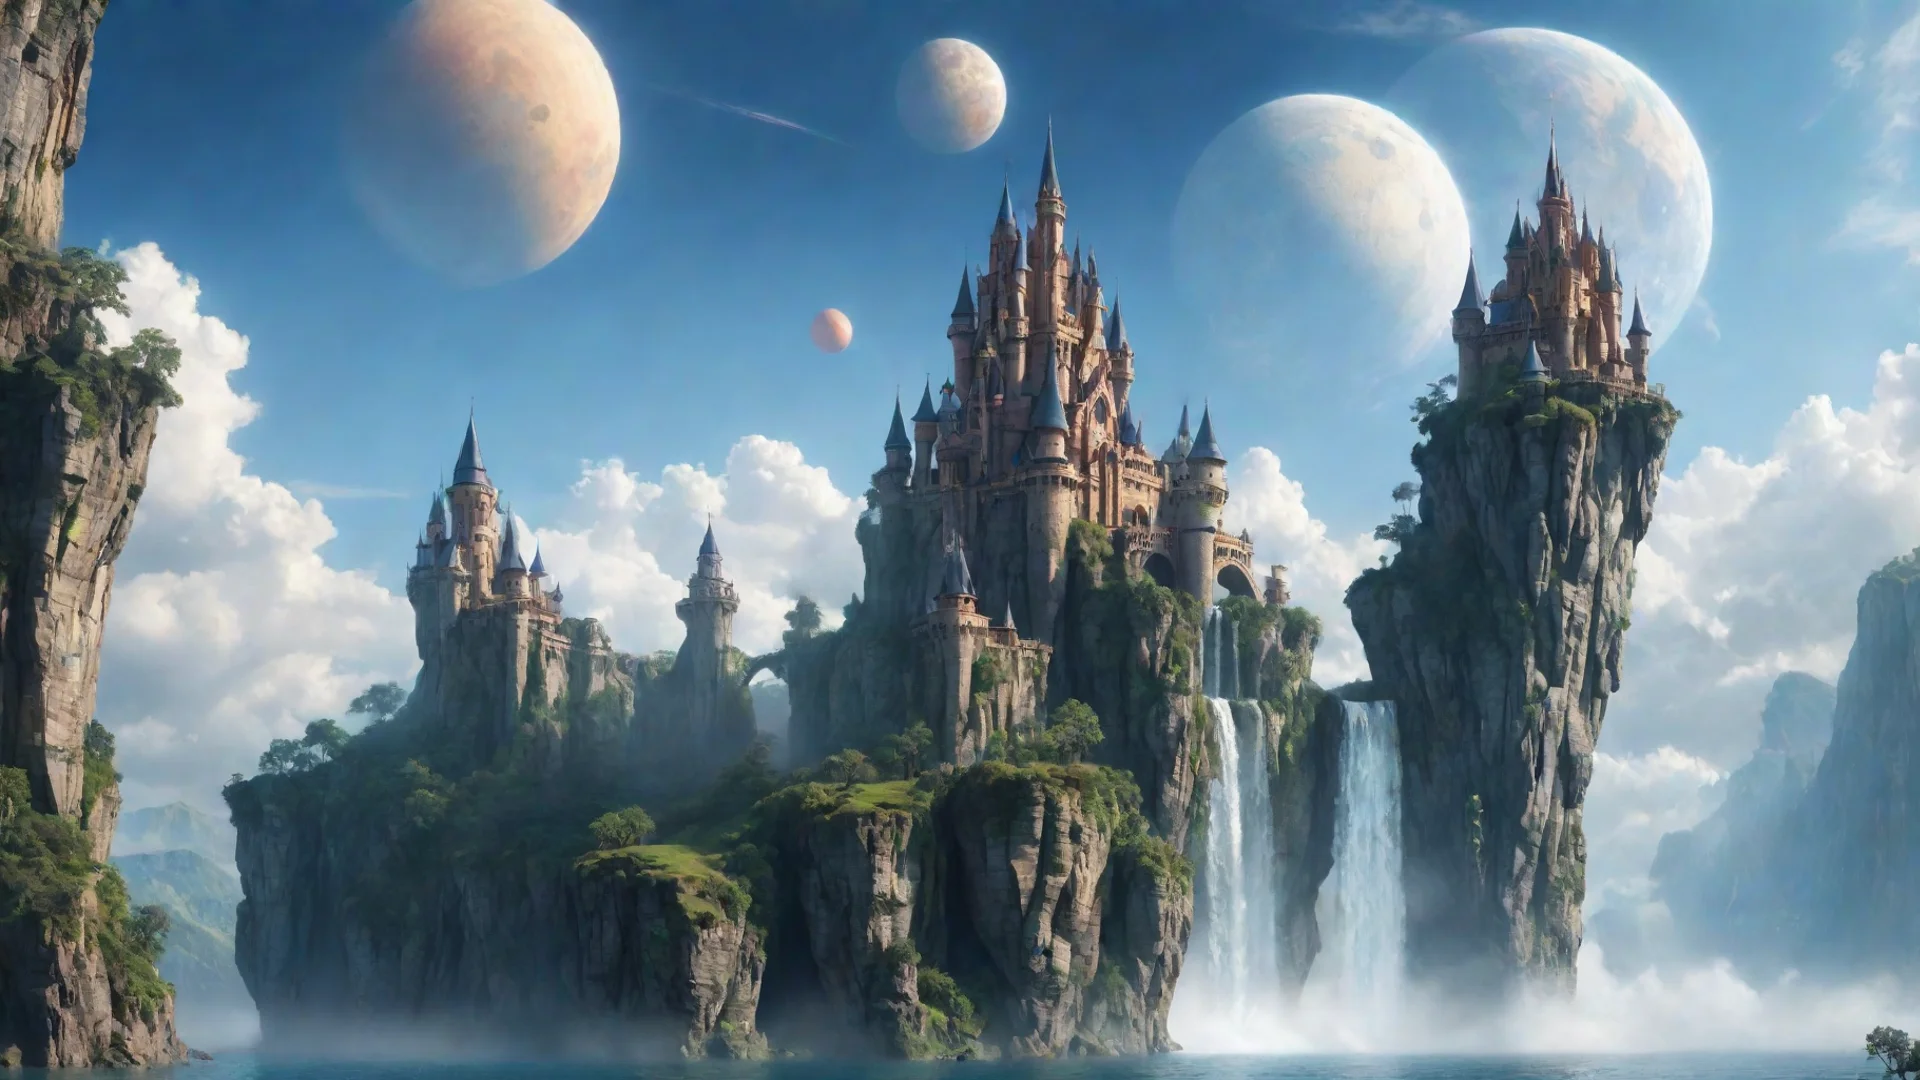 aipeaceful castle in sky epic floating castle on floating cliffs with waterfalls down beautiful sky with saturn planets wide